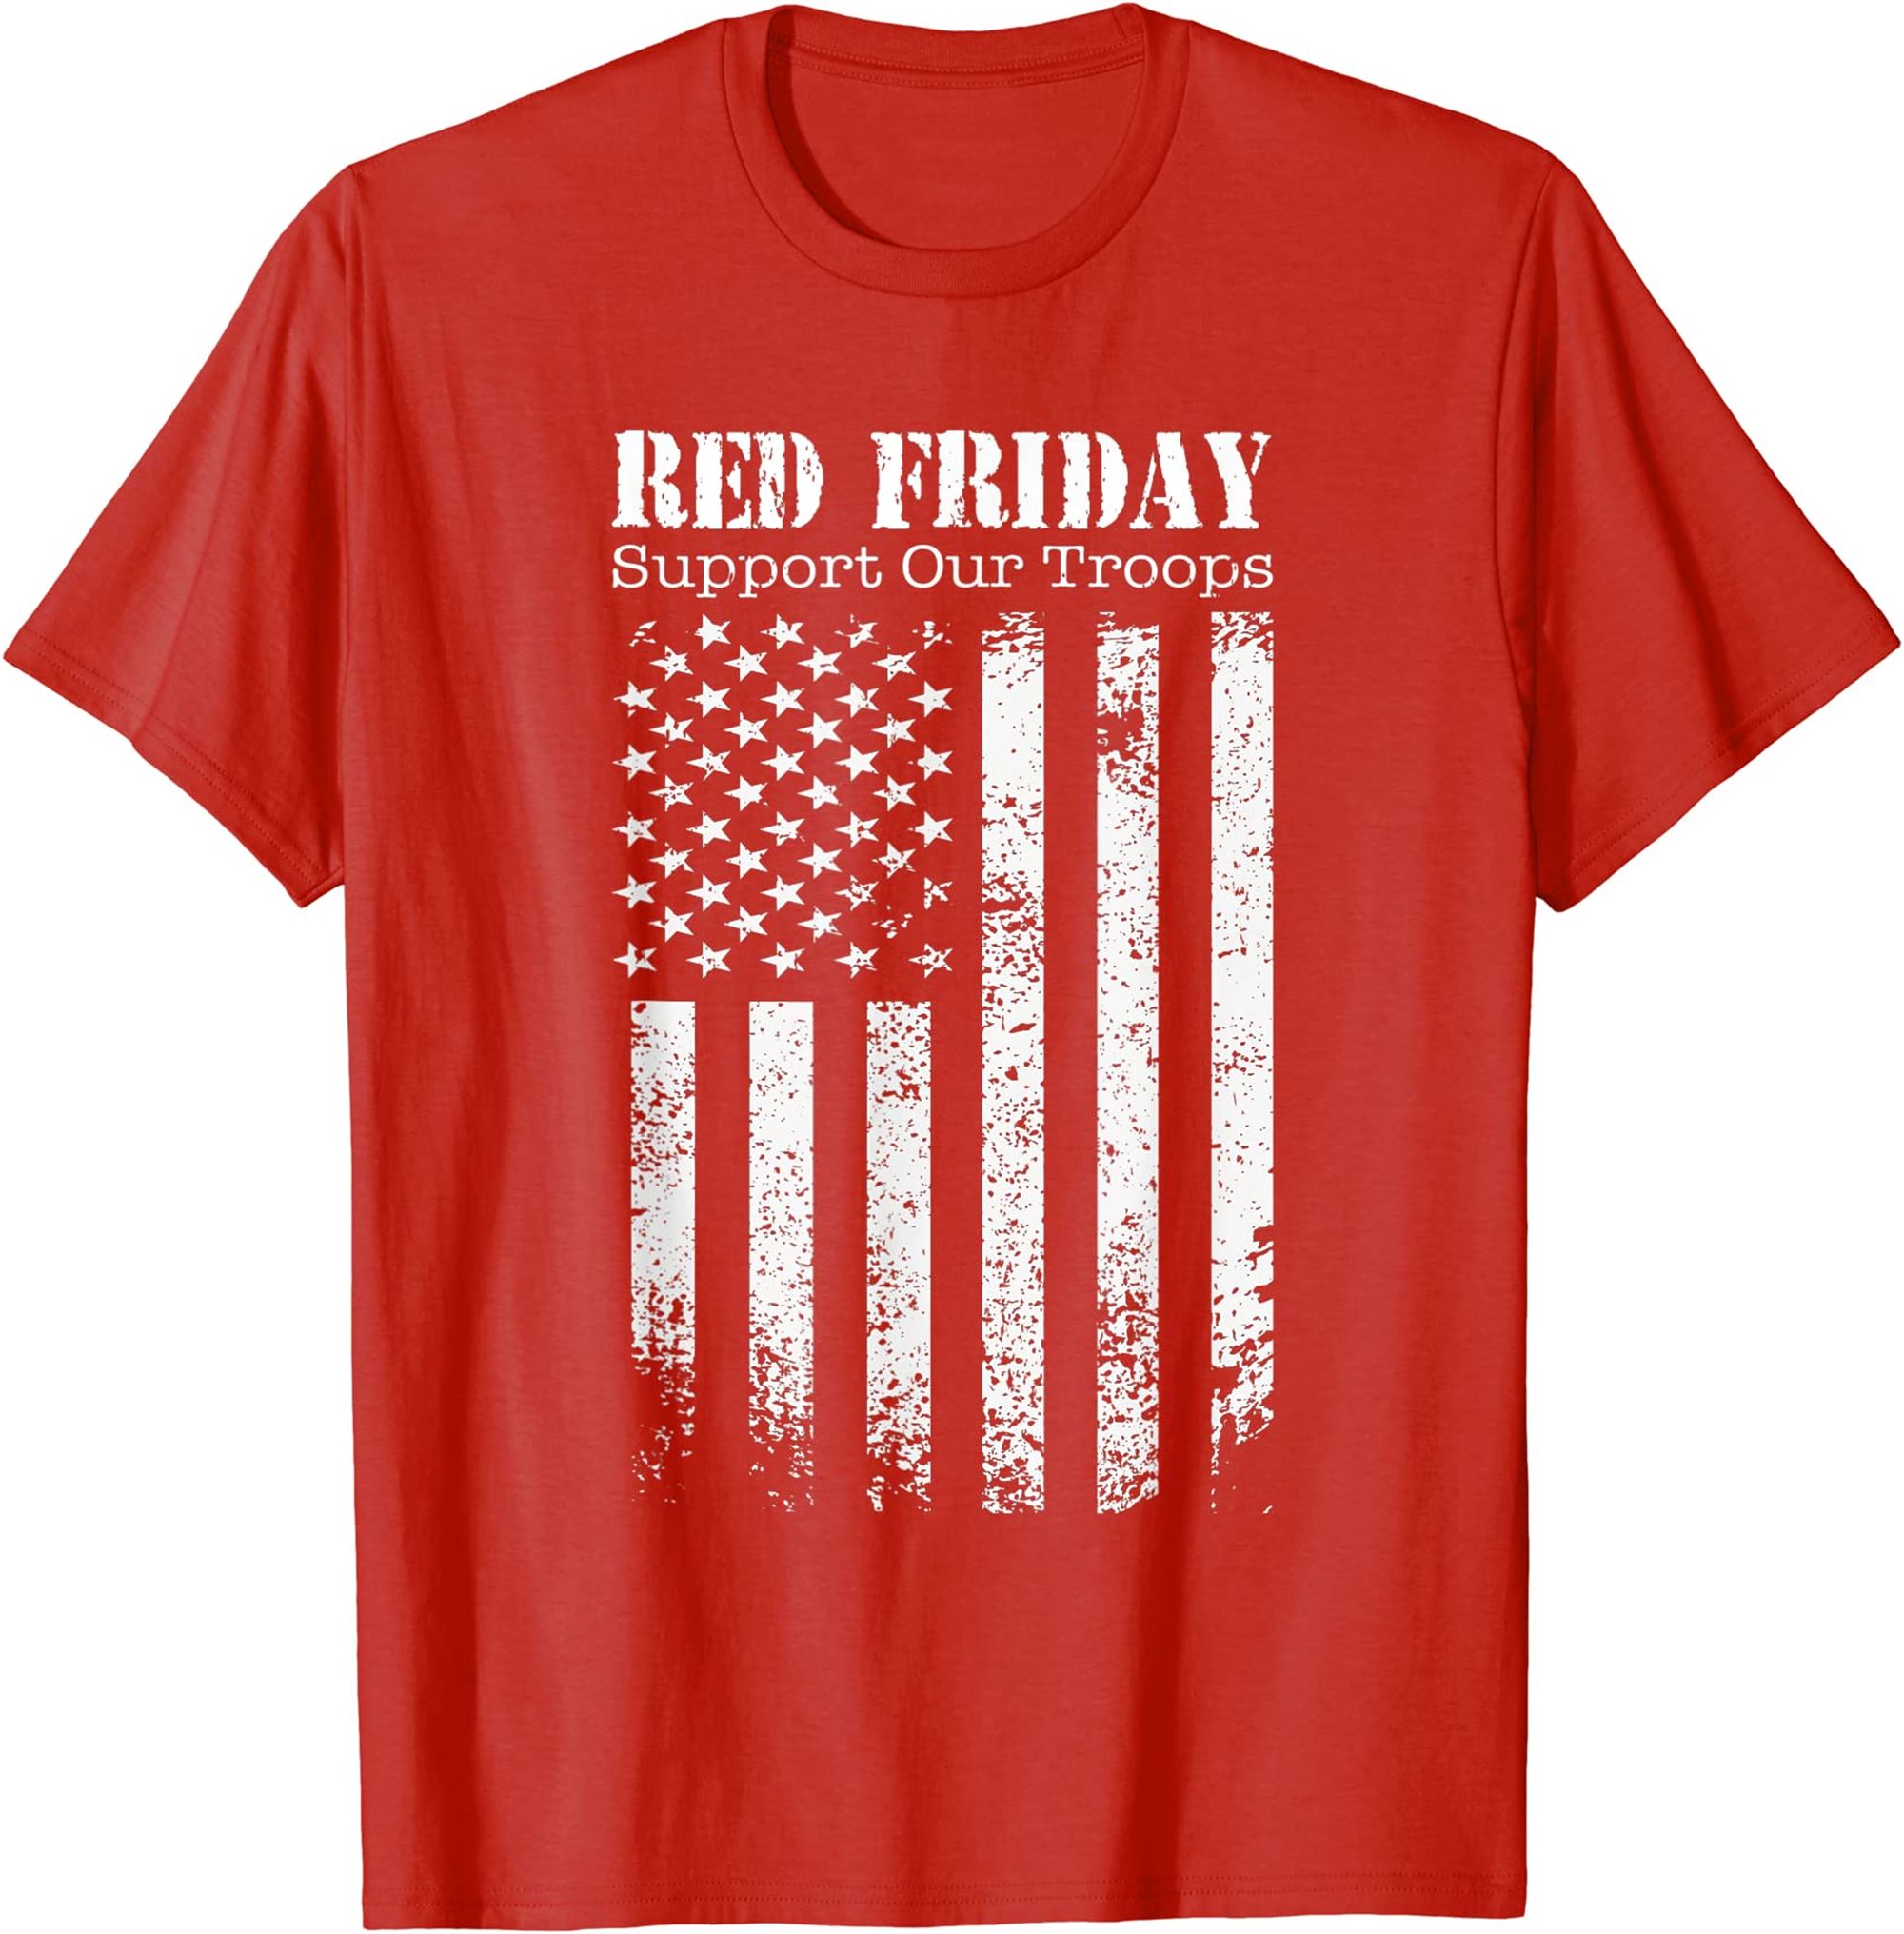 Red Friday Support Our Troops Military Memorial Day T-shirt Full Size Up To 5xl